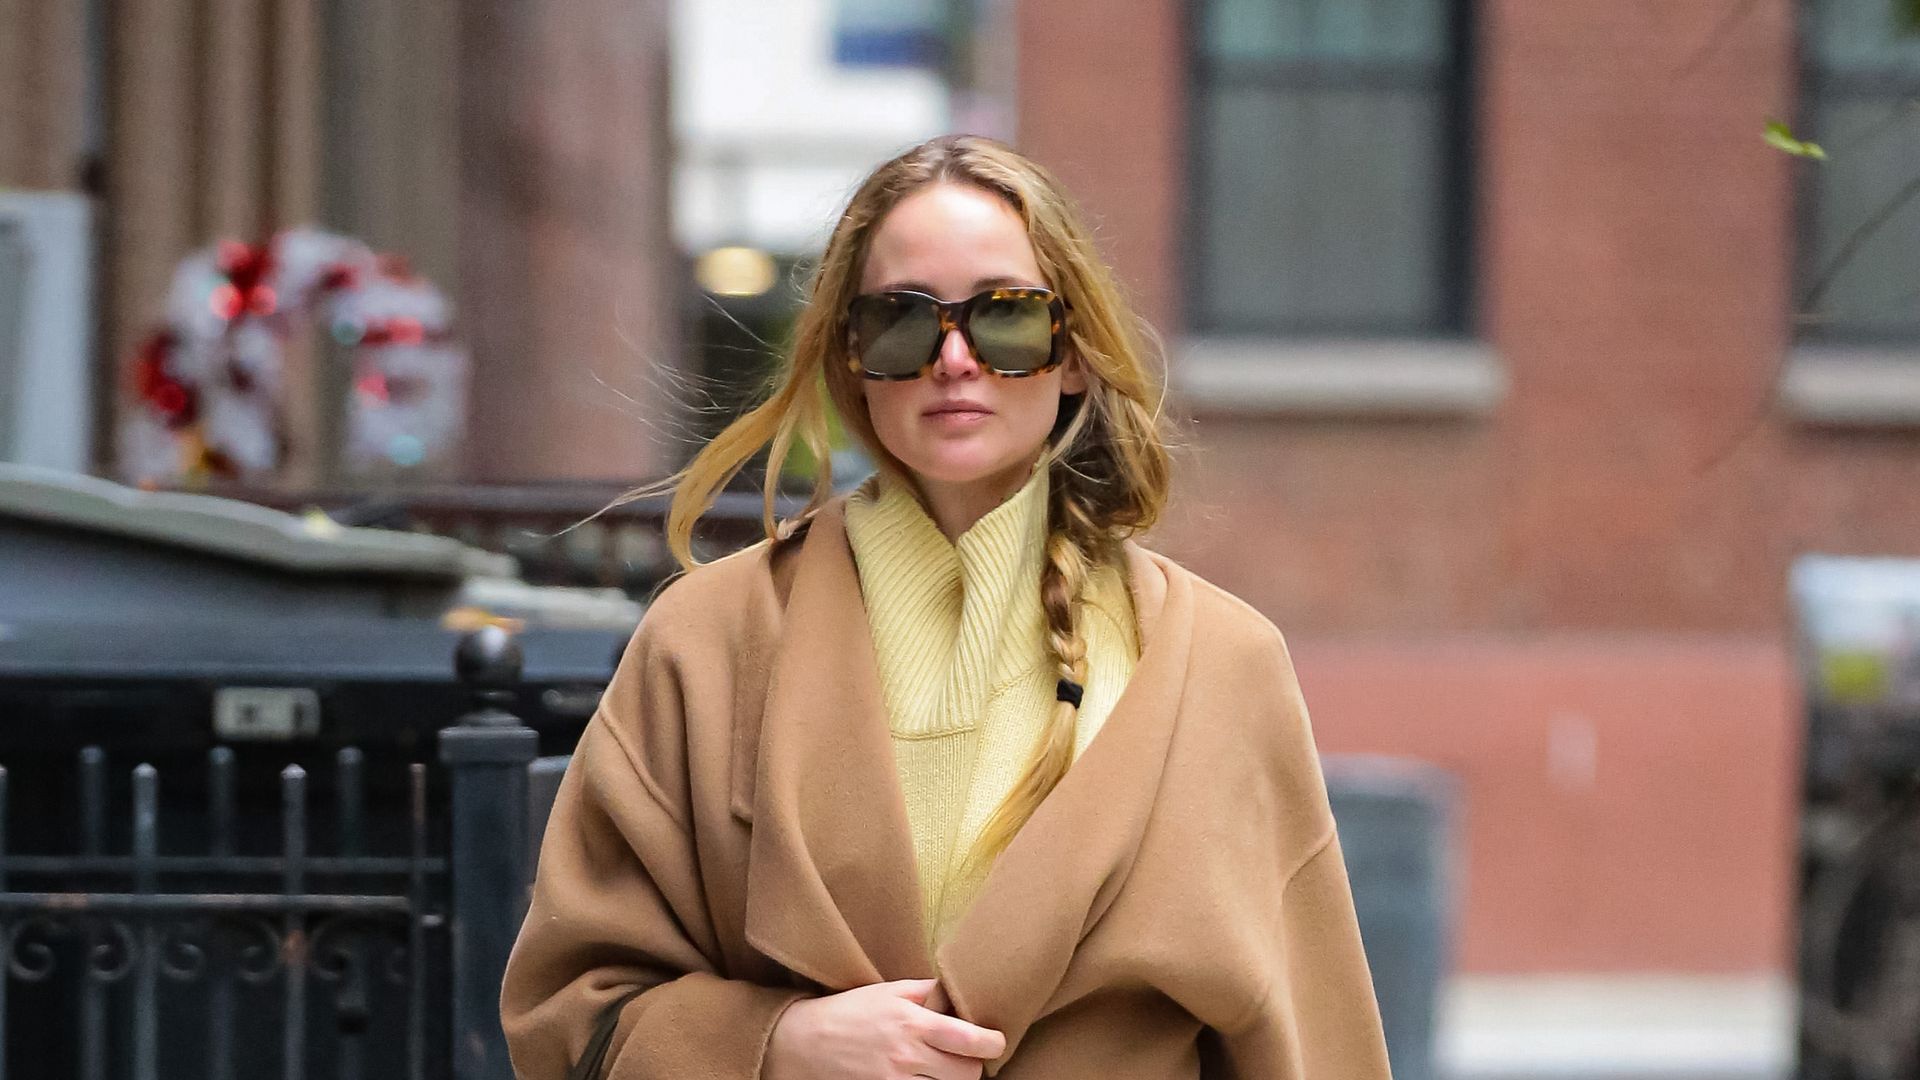 Jennifer Lawrence nails quiet luxury in chic trench coat while stepping out in New York City